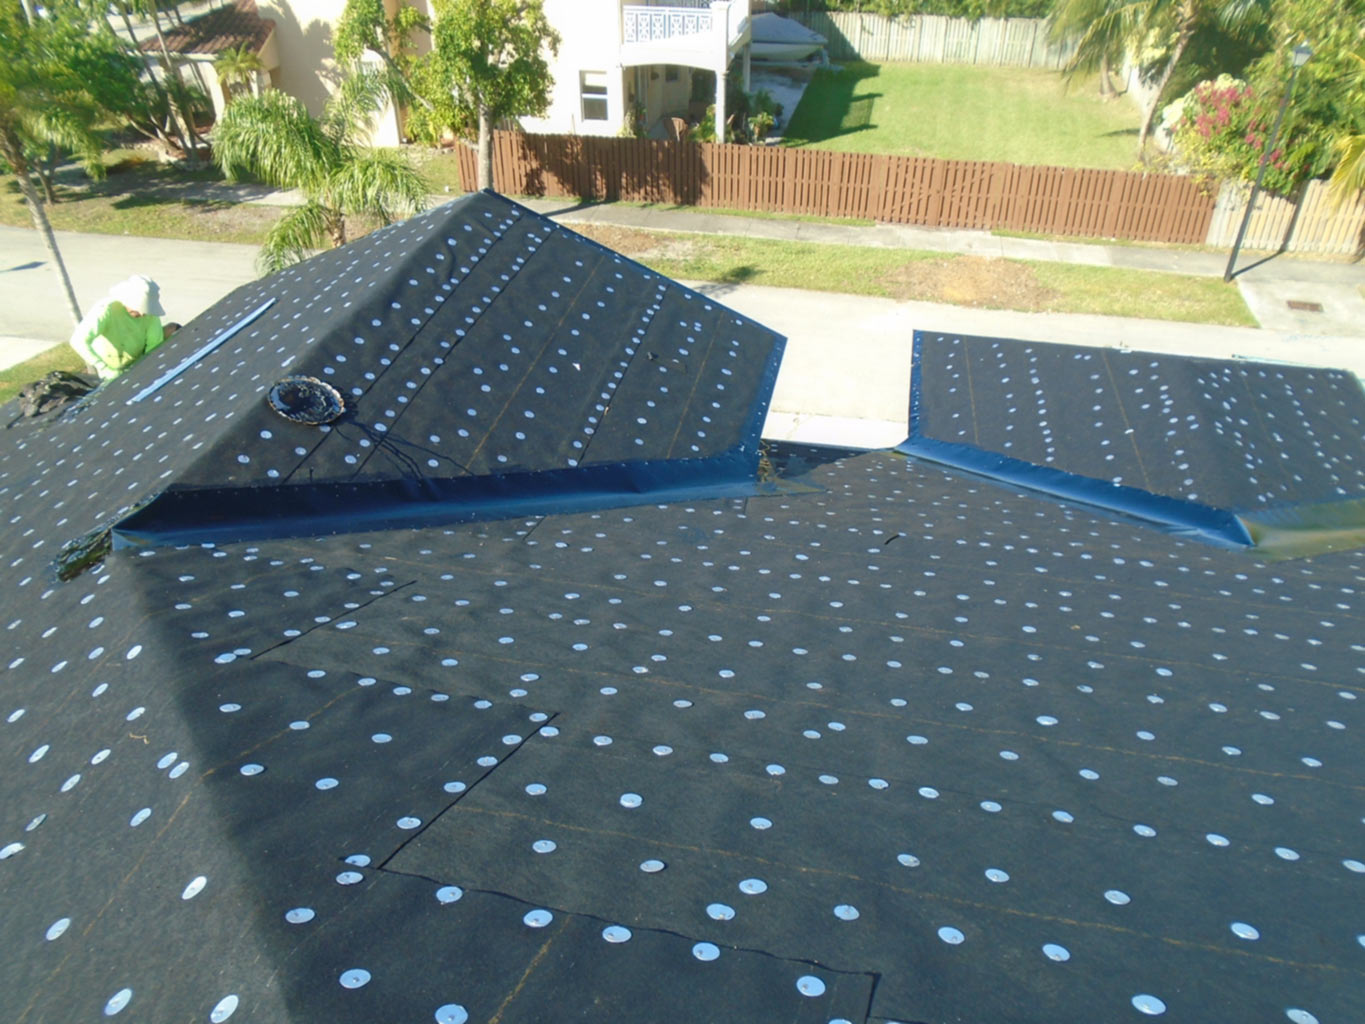 Roof after tin-cap installation.